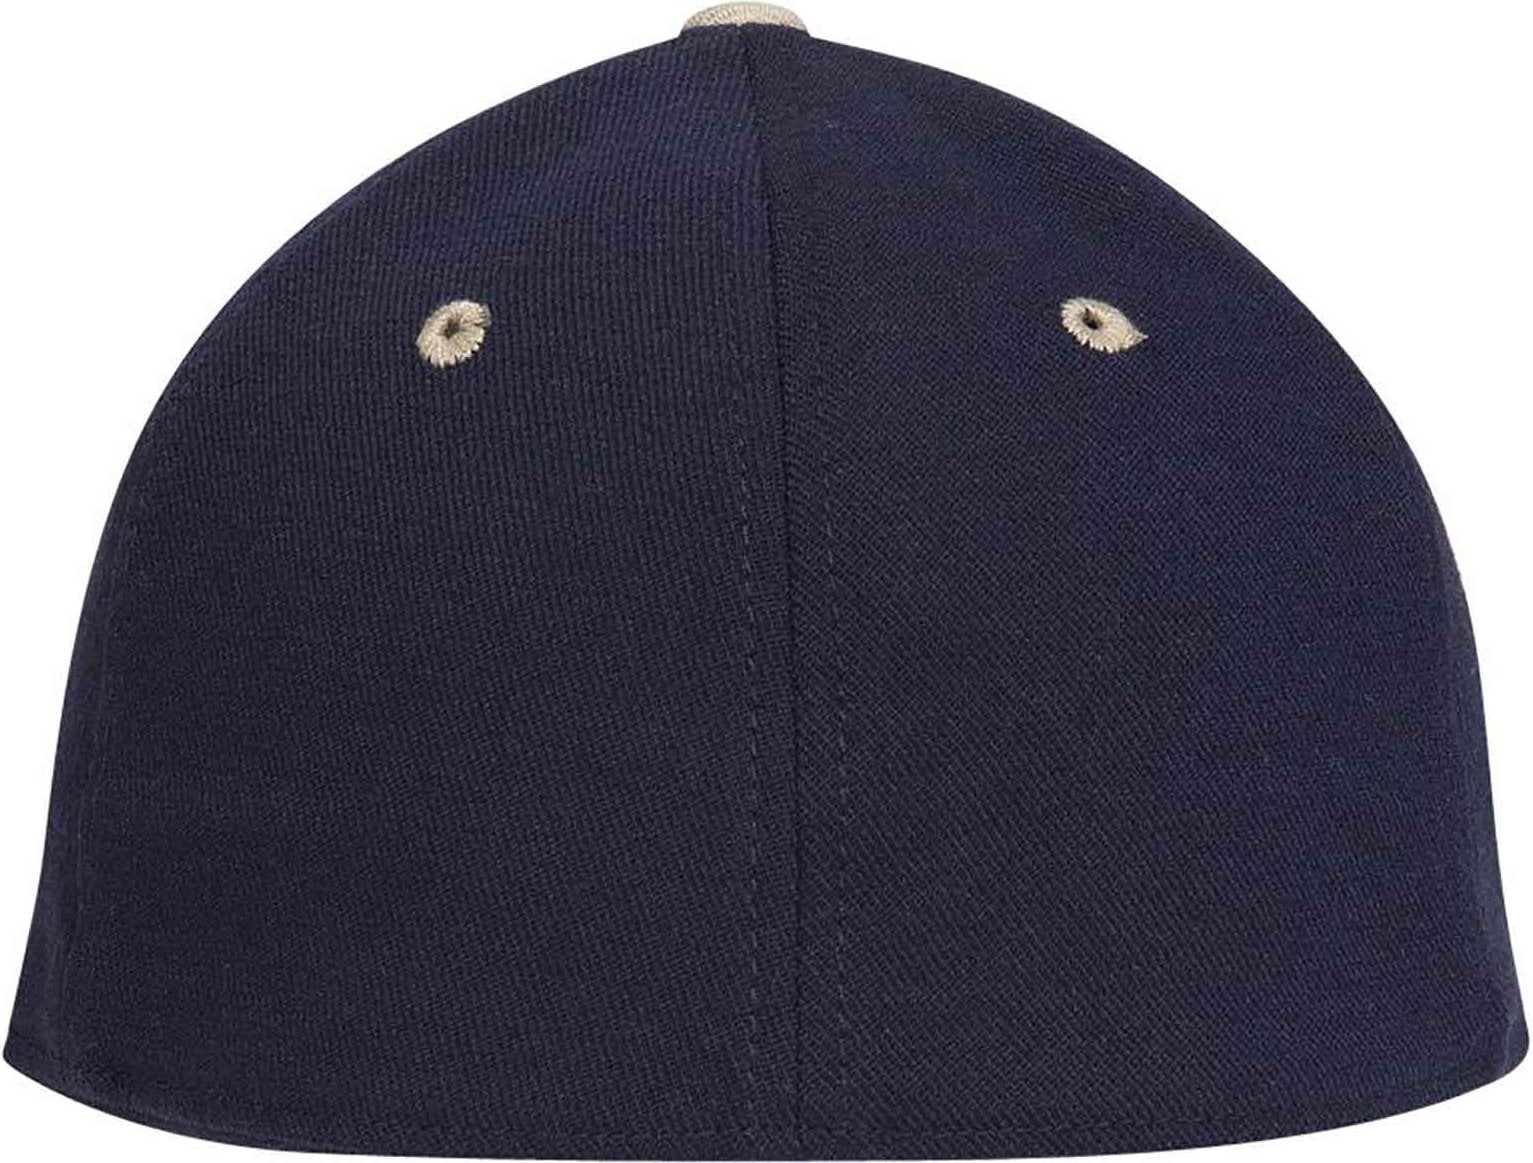 OTTO 11-194 Stretchable Wool Blend Low Profile Pro Style Cap - Khaki Navy - HIT a Double - 1